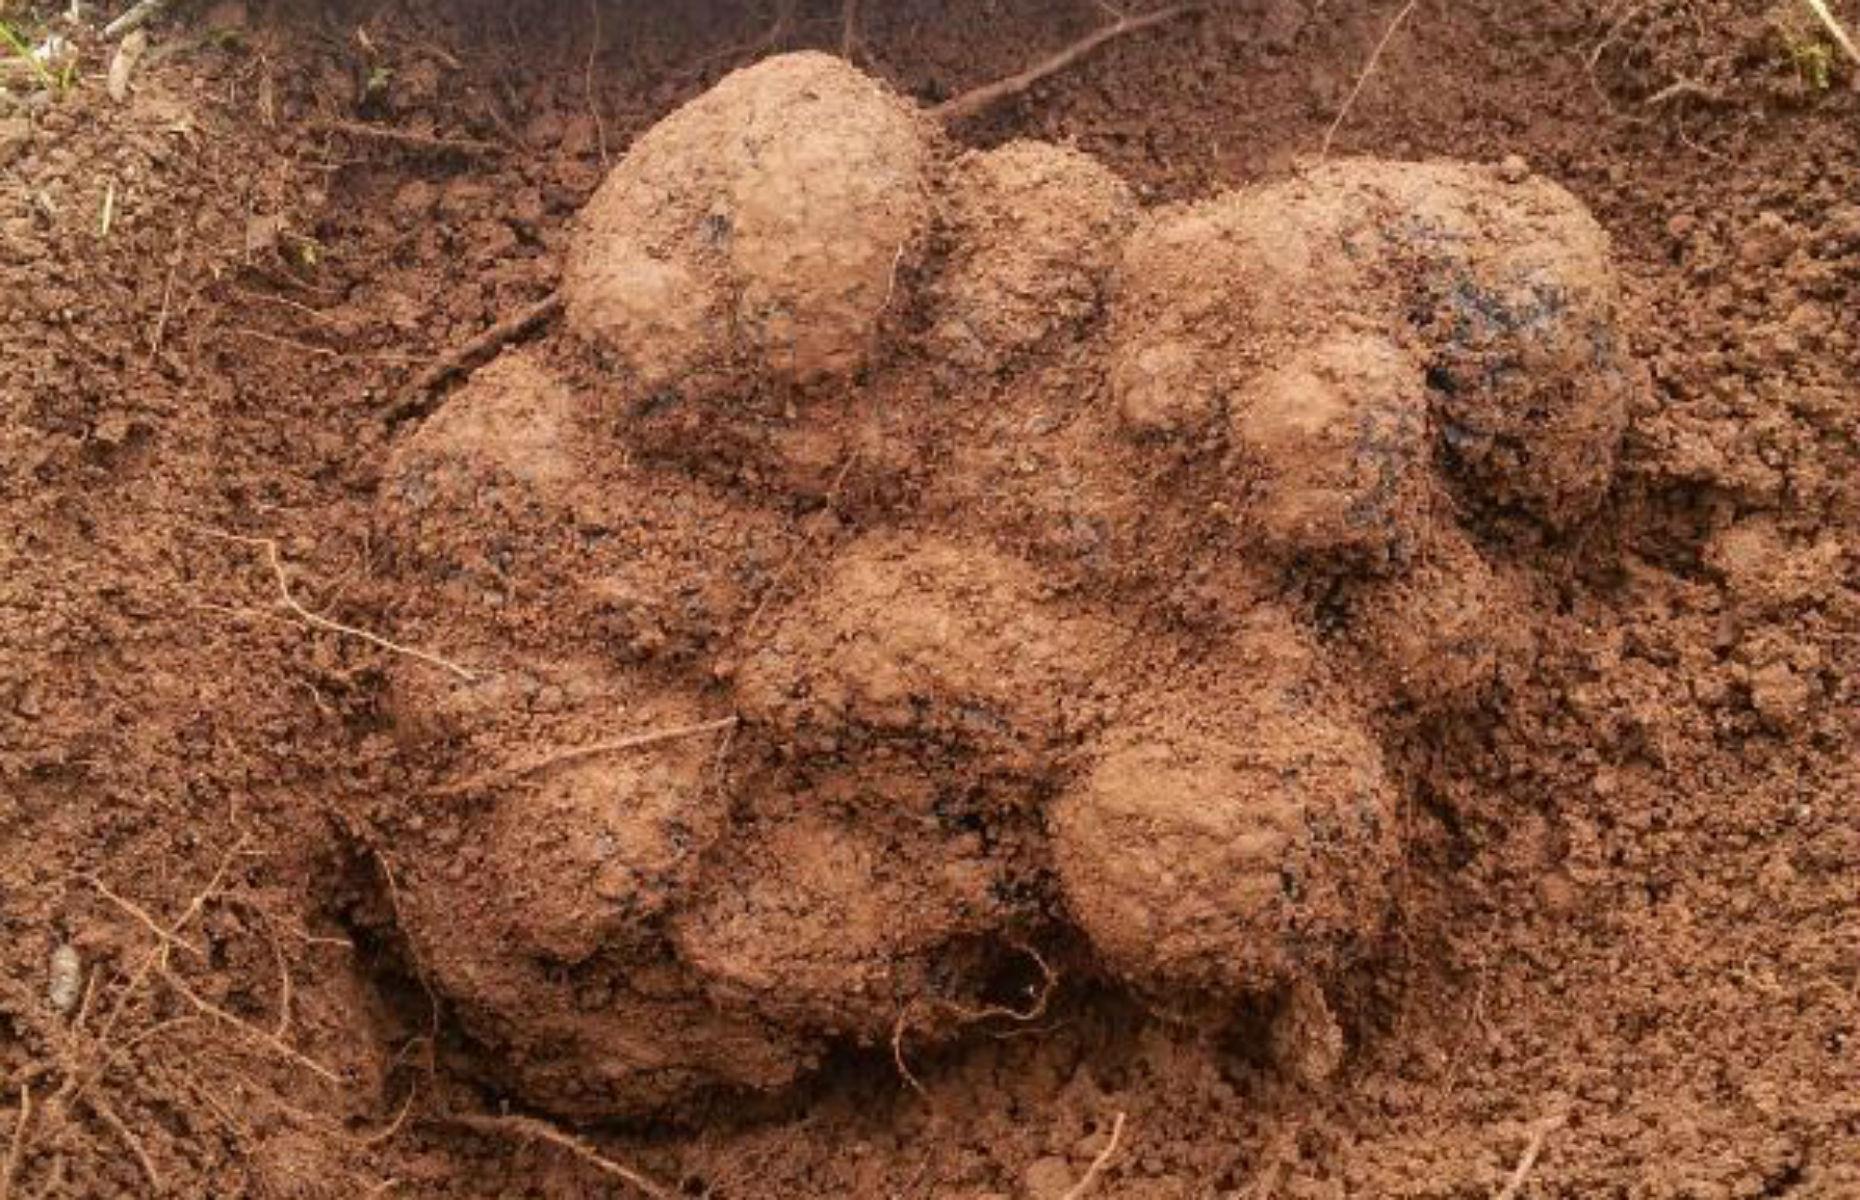 One of the world’s largest black truffles